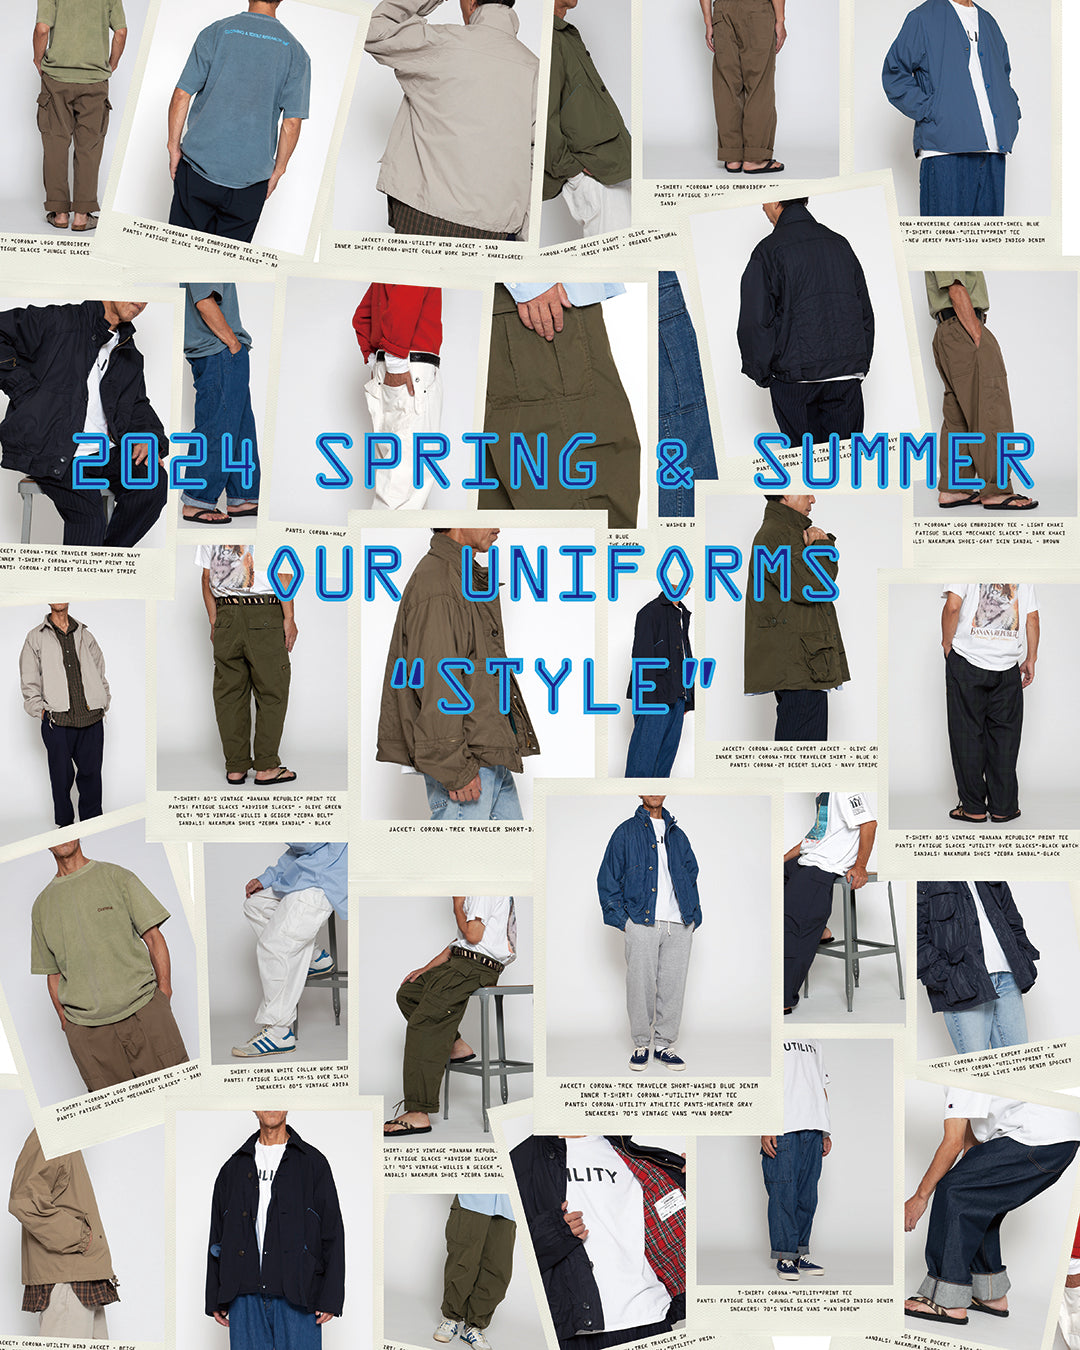 2024 SPRING & SUMMER “OUR UNIFORMS” ITEM & STYLE